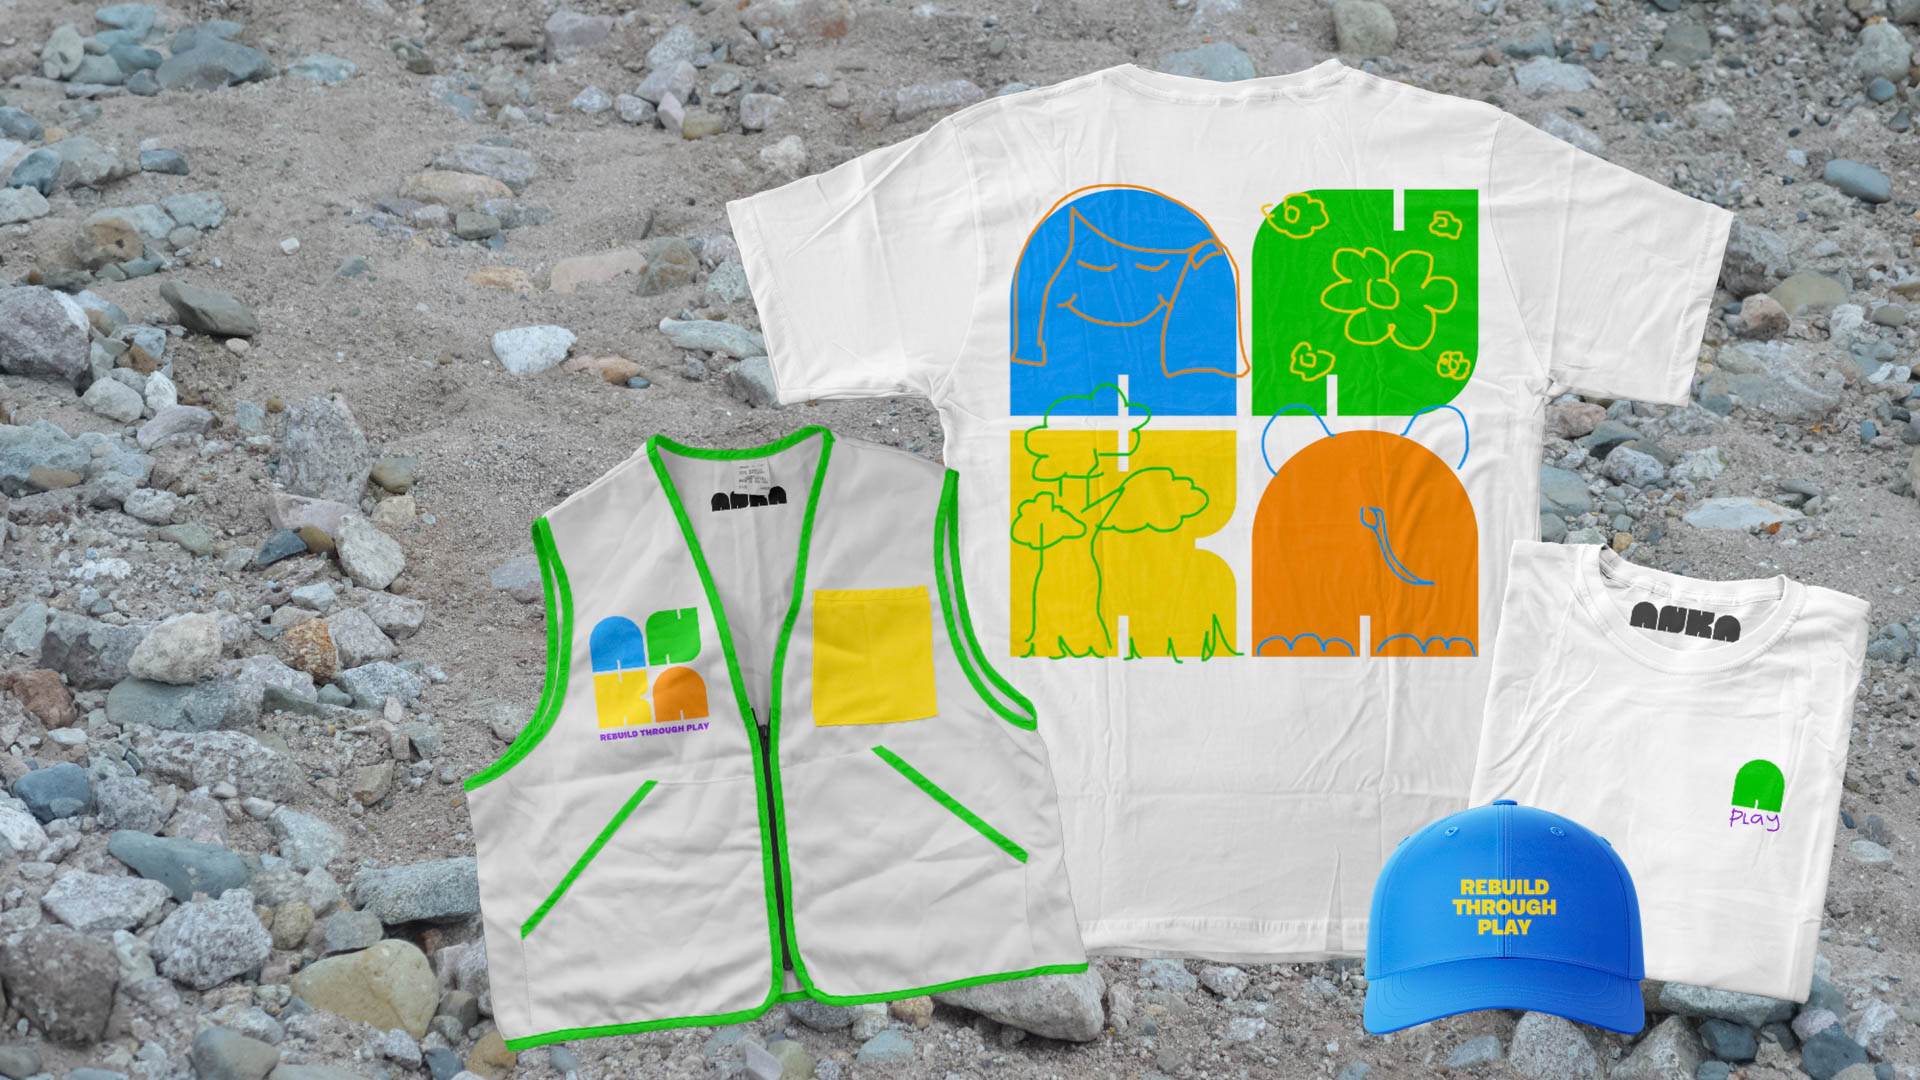 Tshirt and vest with the colorful ANKA venture logo